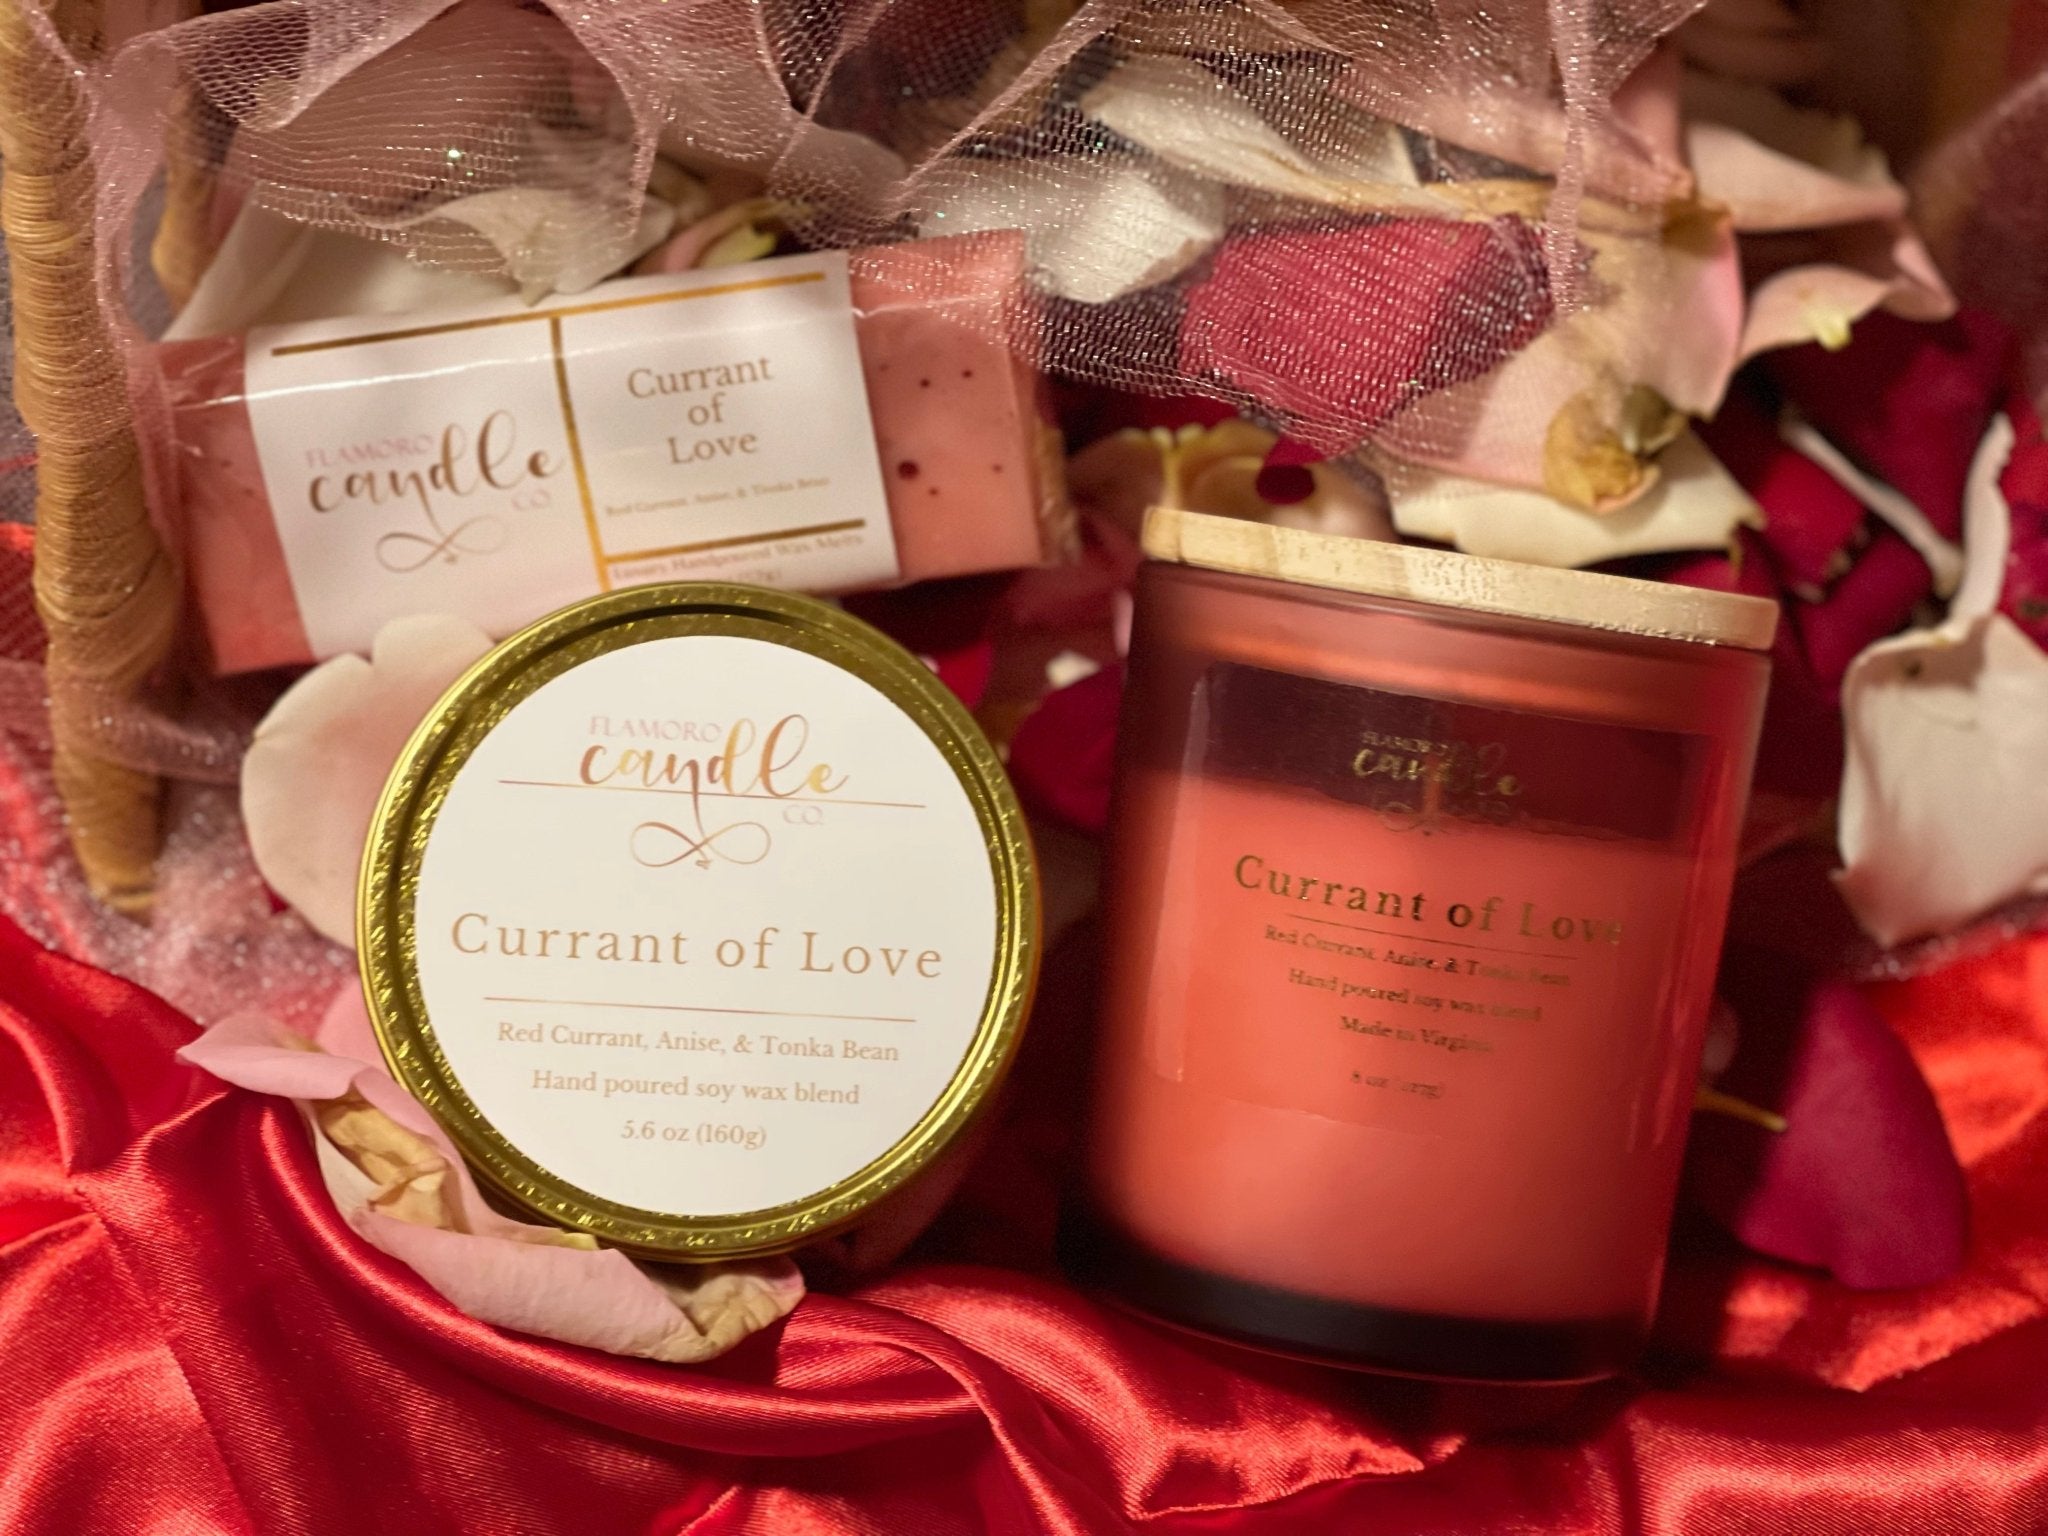 Currant of Love - Flamoro Candle Co.